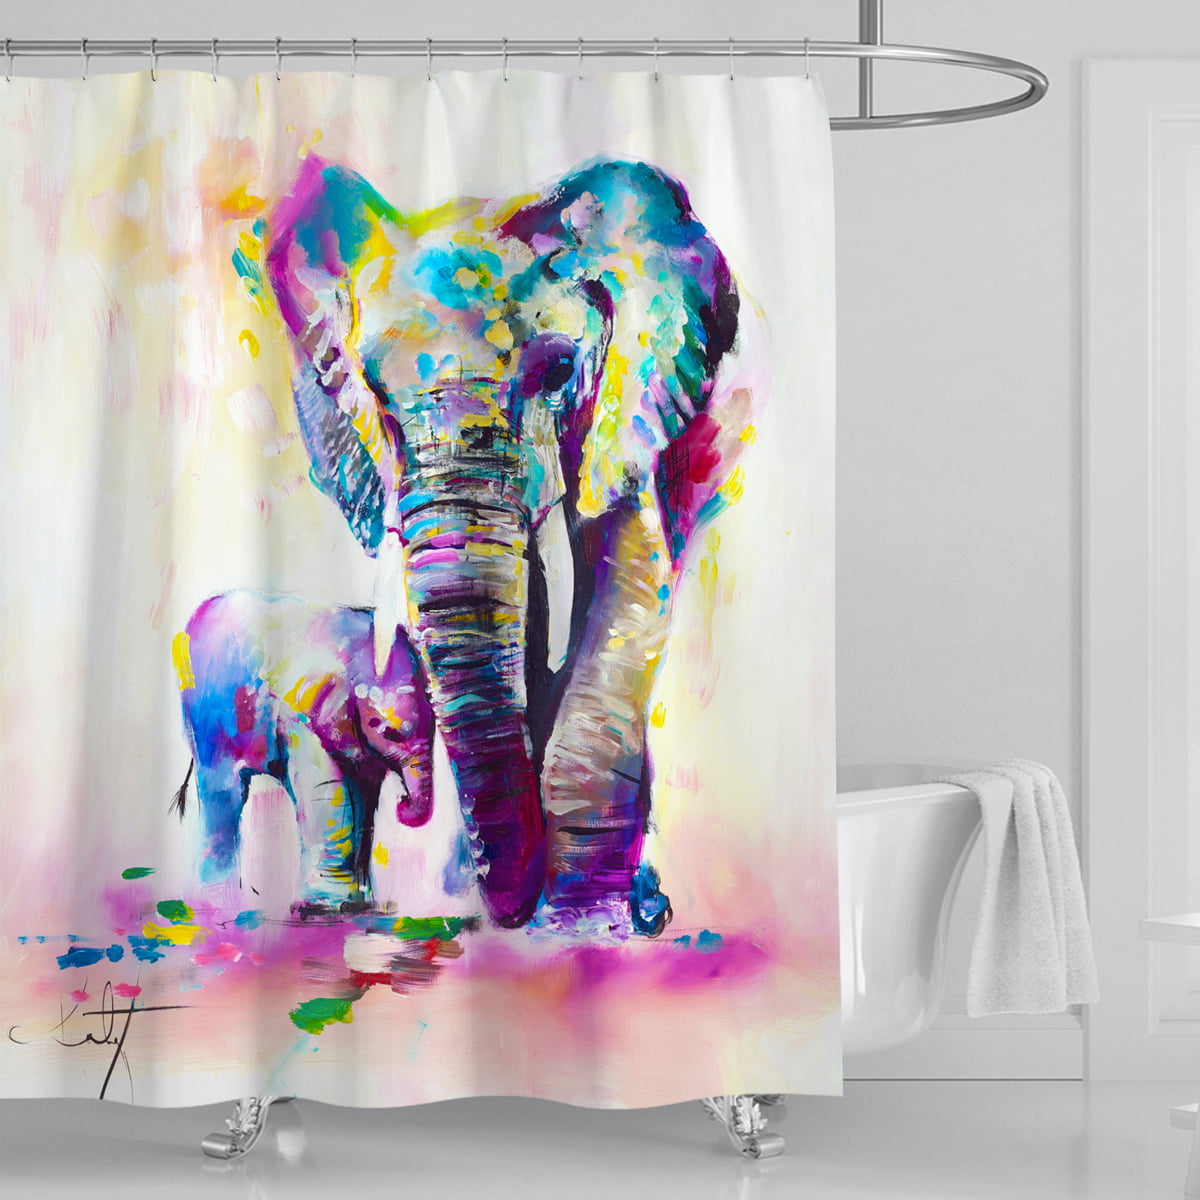 Ball Elephant Waterproof Bathroom Polyester Shower Curtain Liner Water Resistant 